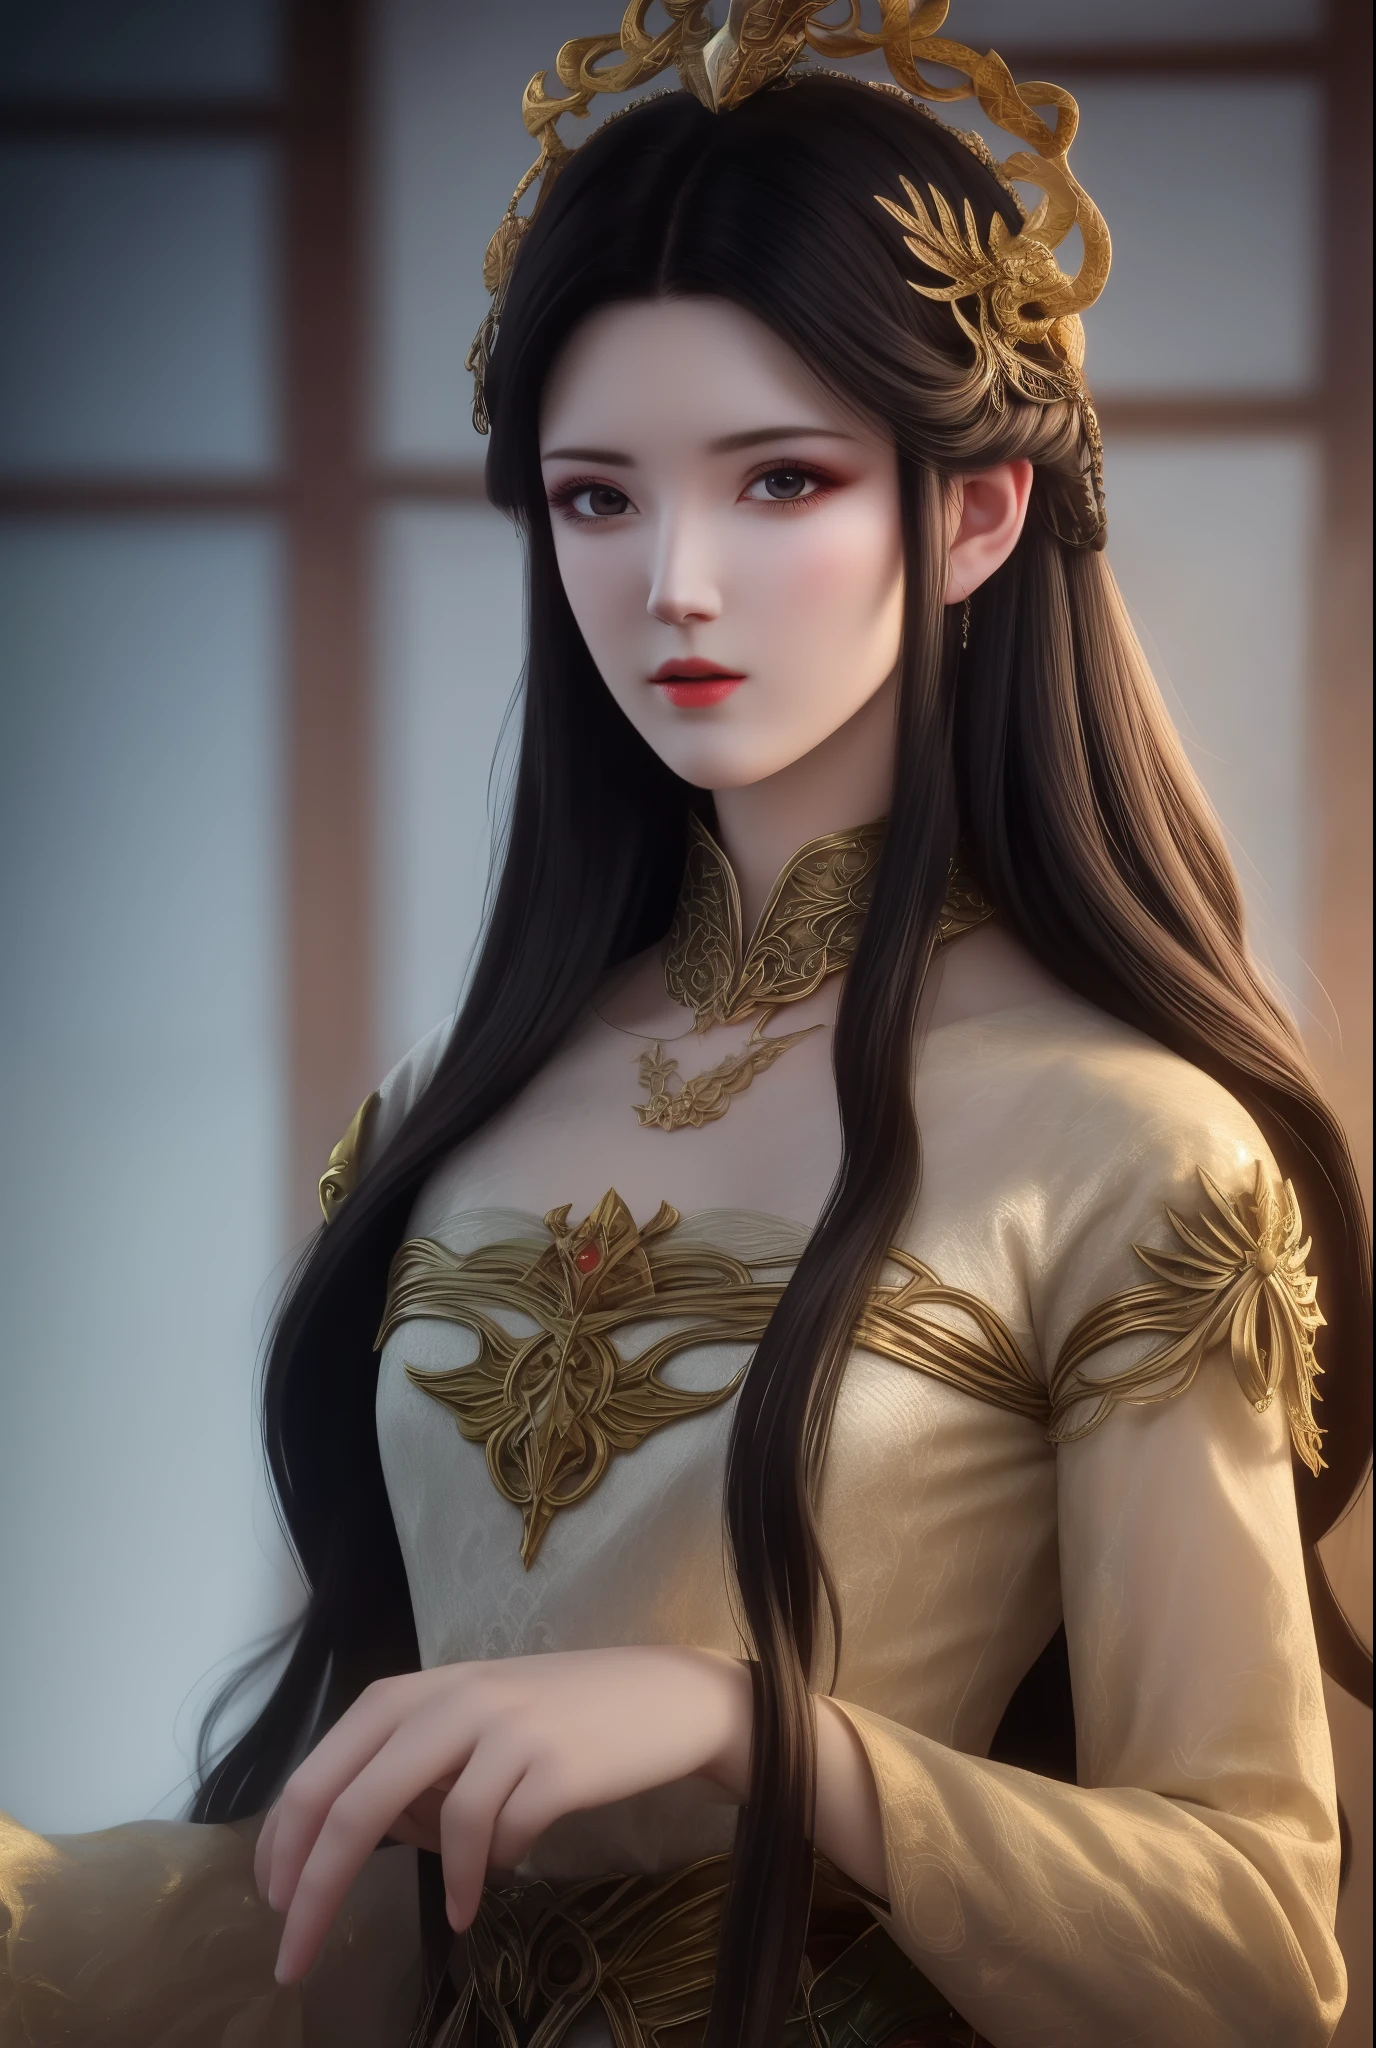 beautiful detailed eyes, detailed lips, long wavy hair, serpents for hair, fierce expression, pale complexion, snake-like scales on the skin, mesmerizing gaze, mythical creature, dark and mysterious background, artistic oil painting style, vibrant colors, soft lighting